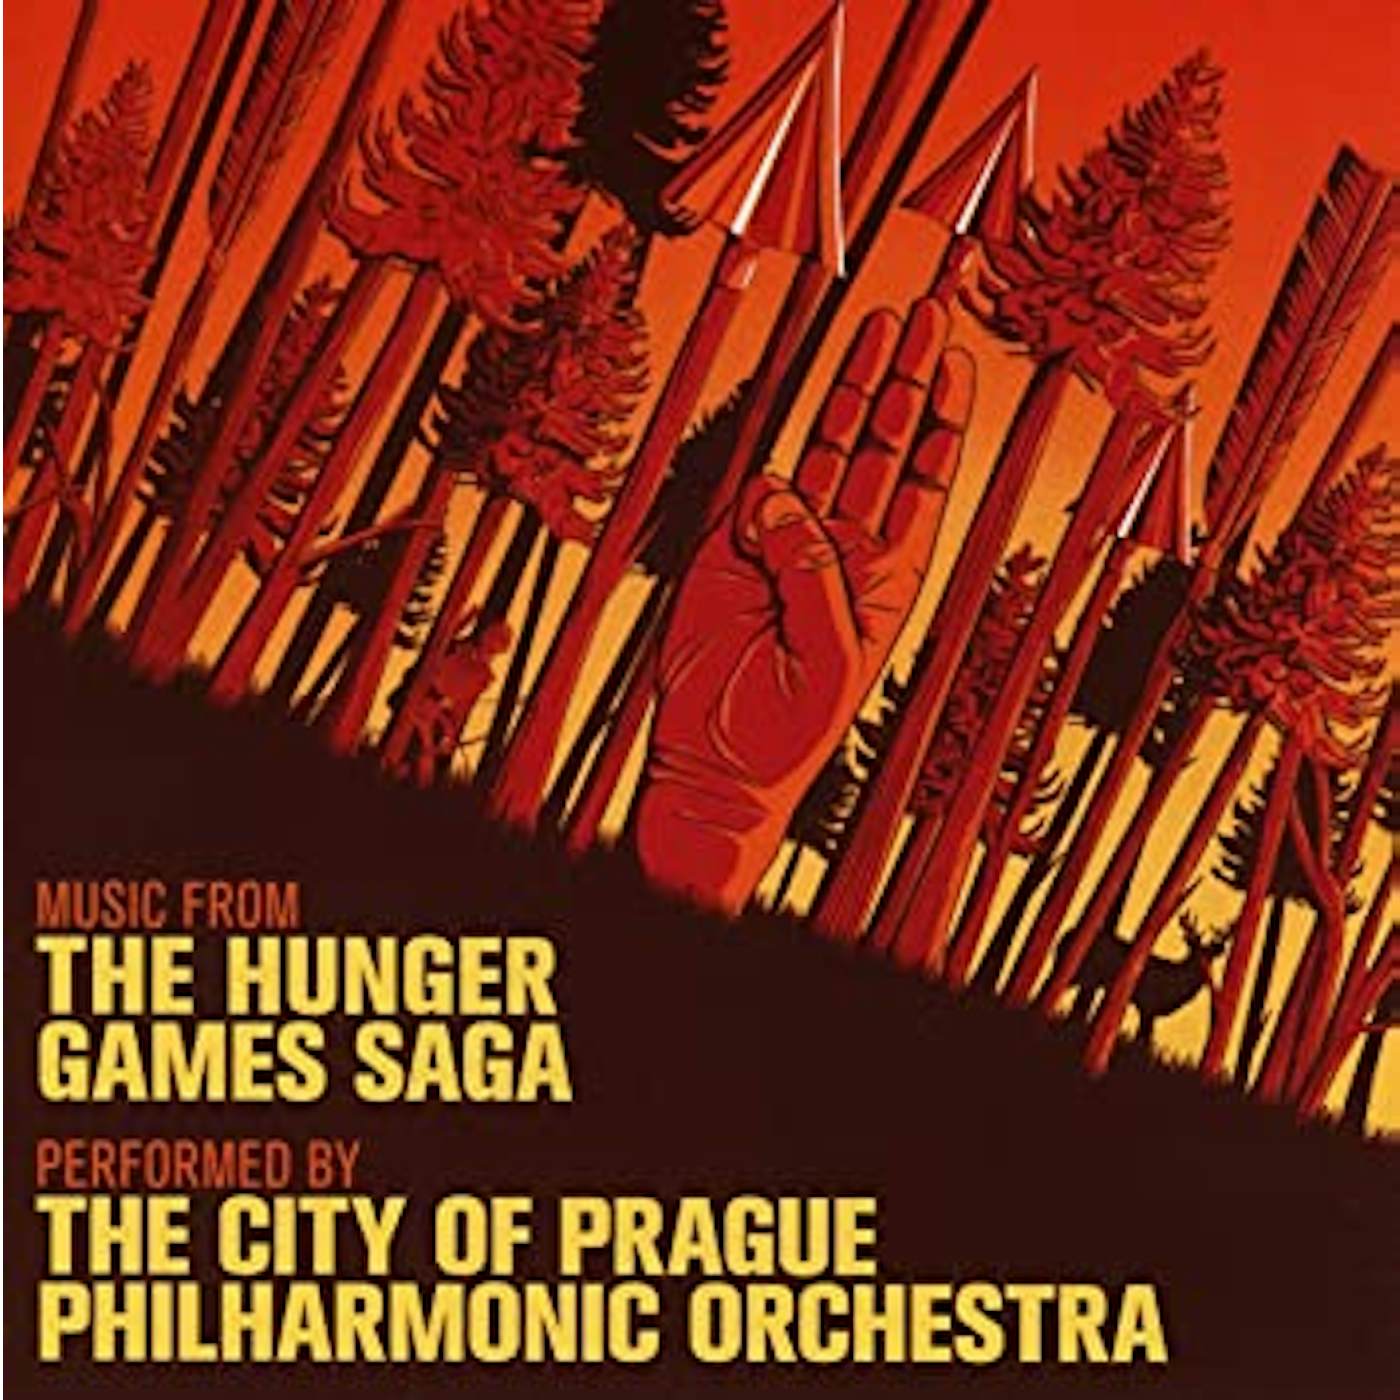 The City of Prague Philharmonic Orchestra Music from The Hunger Games Saga - Original Soundtrack Vinyl Record